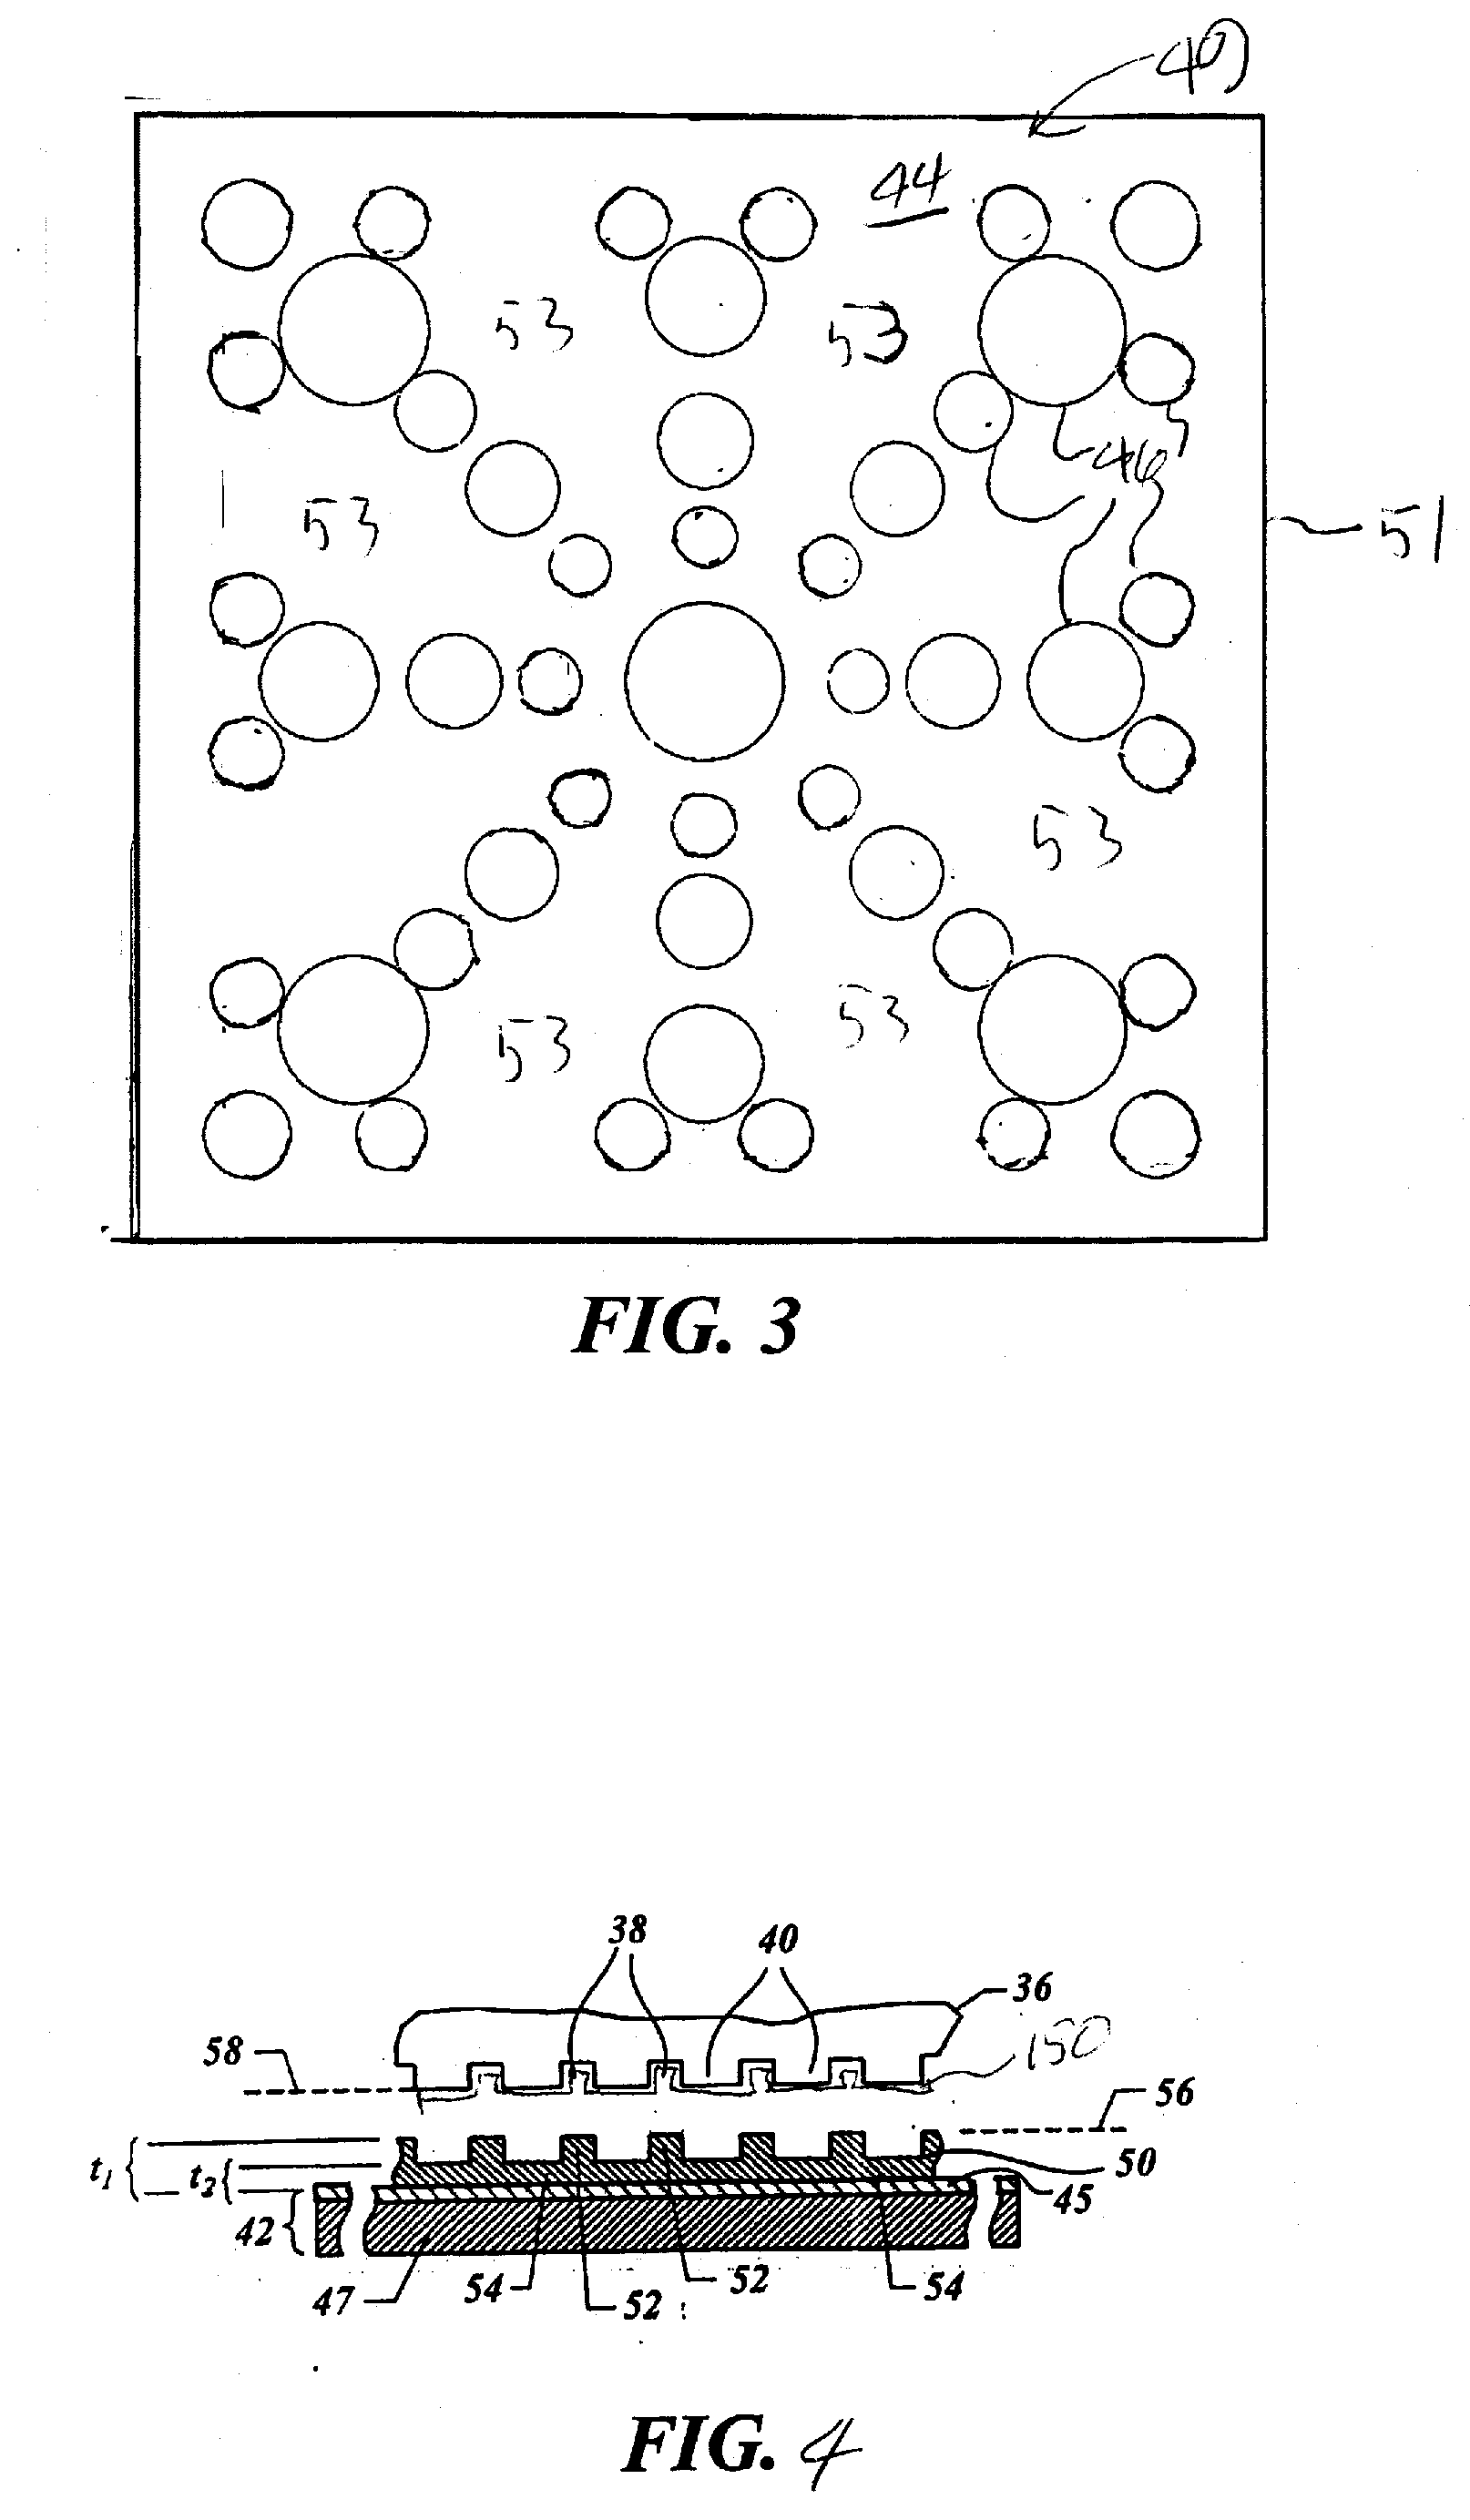 Method for controlling distribution of fluid components on a body